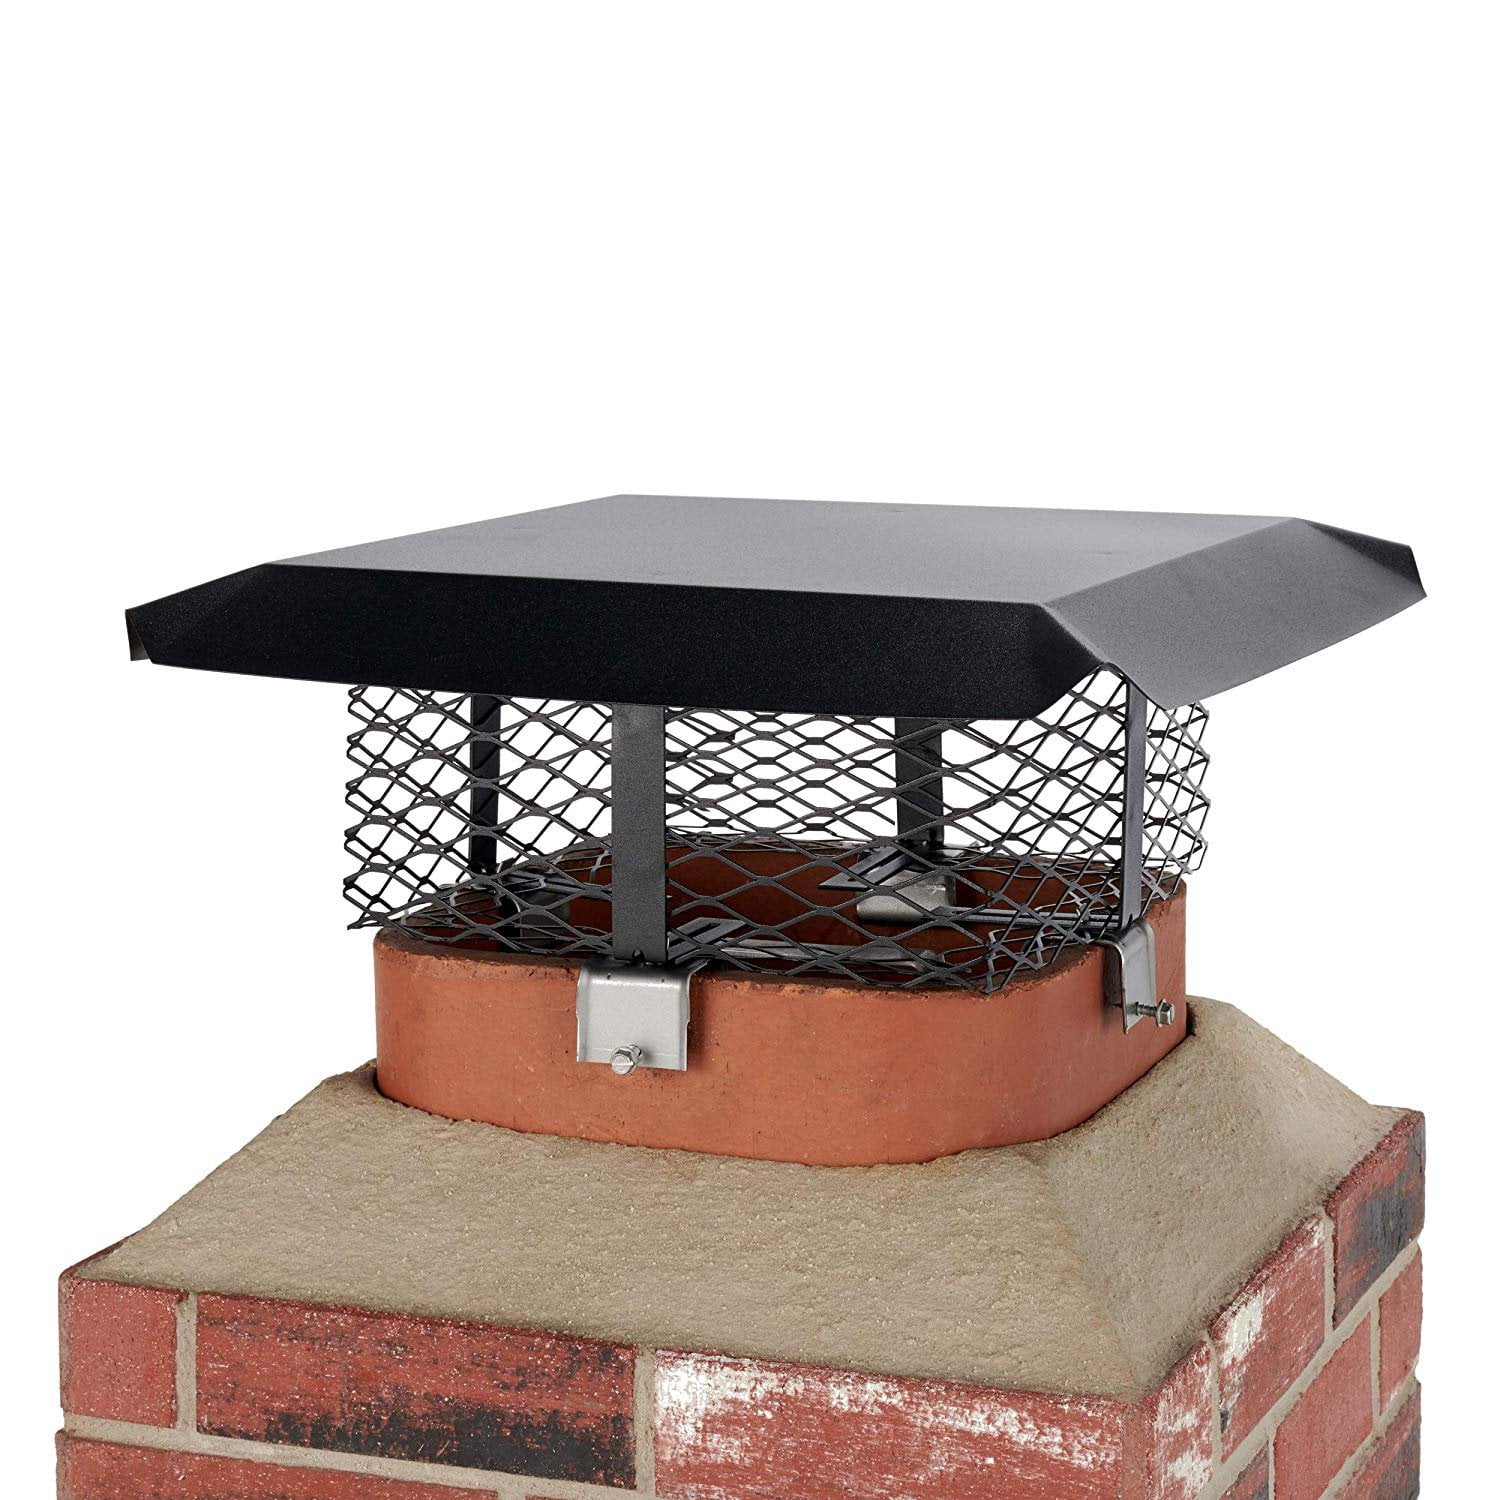 HY-C SCADJ-L Shelter Adjustable Clamp On Single Chimney Cover, Fits Outside  Various Sizes of Existing Clay Flue Tile, Large, Black Galvanized Steel -  Walmart.com